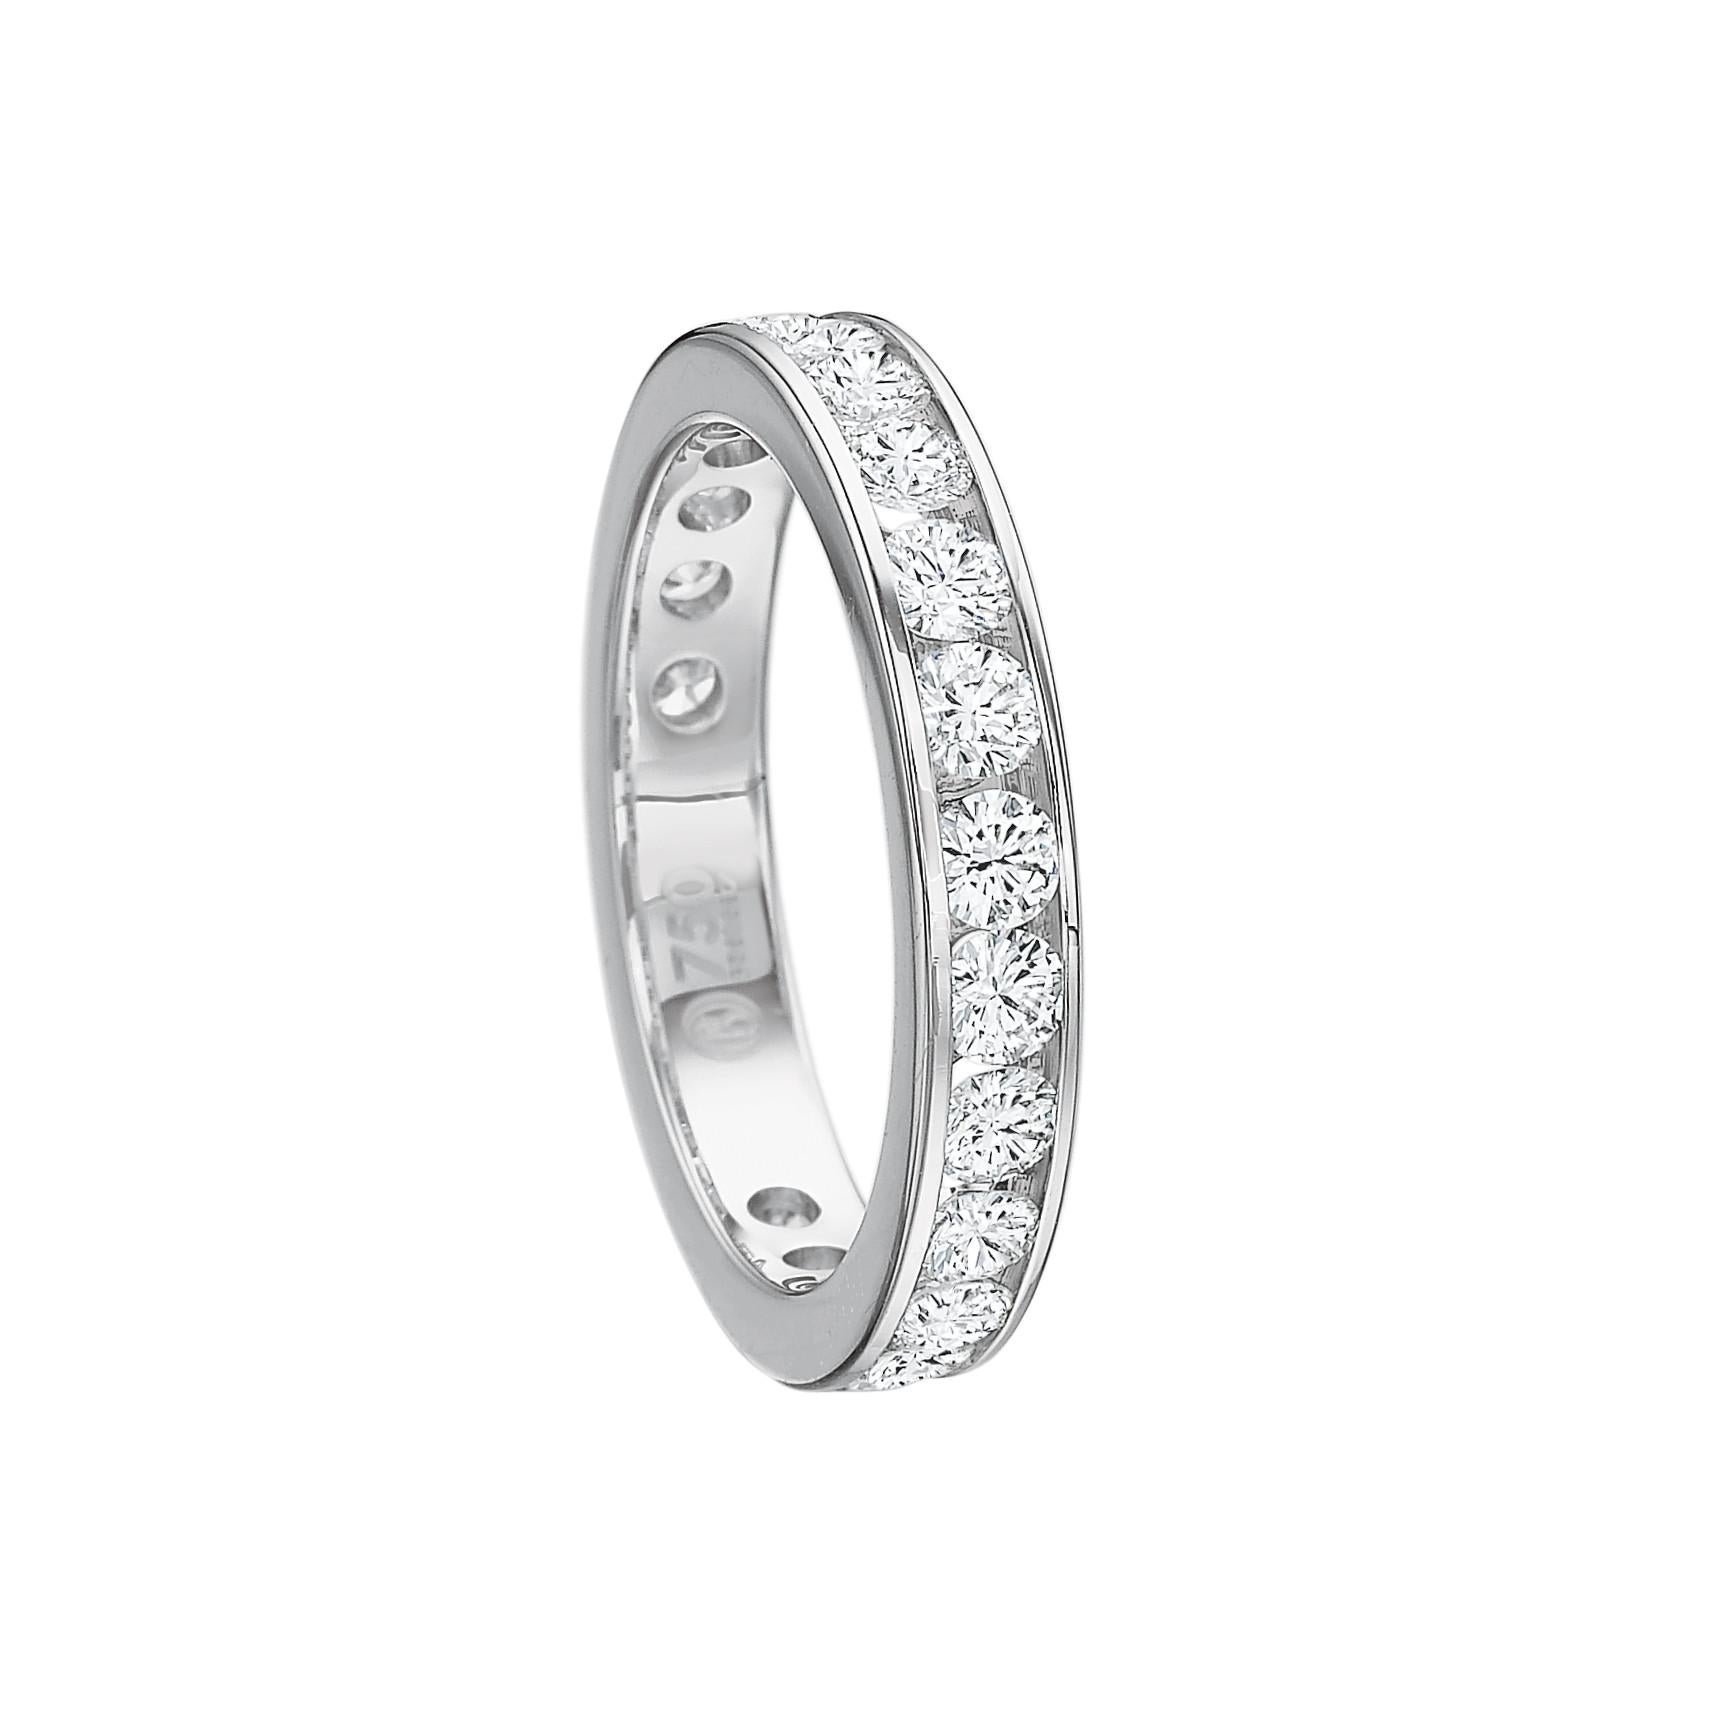 Diamond eternity band ring, showcasing near-colorless round brilliant-cut diamonds channel-set in high-polished platinum.

Twenty-three diamonds weighing 1.50 total carats
3.6mm wide
Size 6
